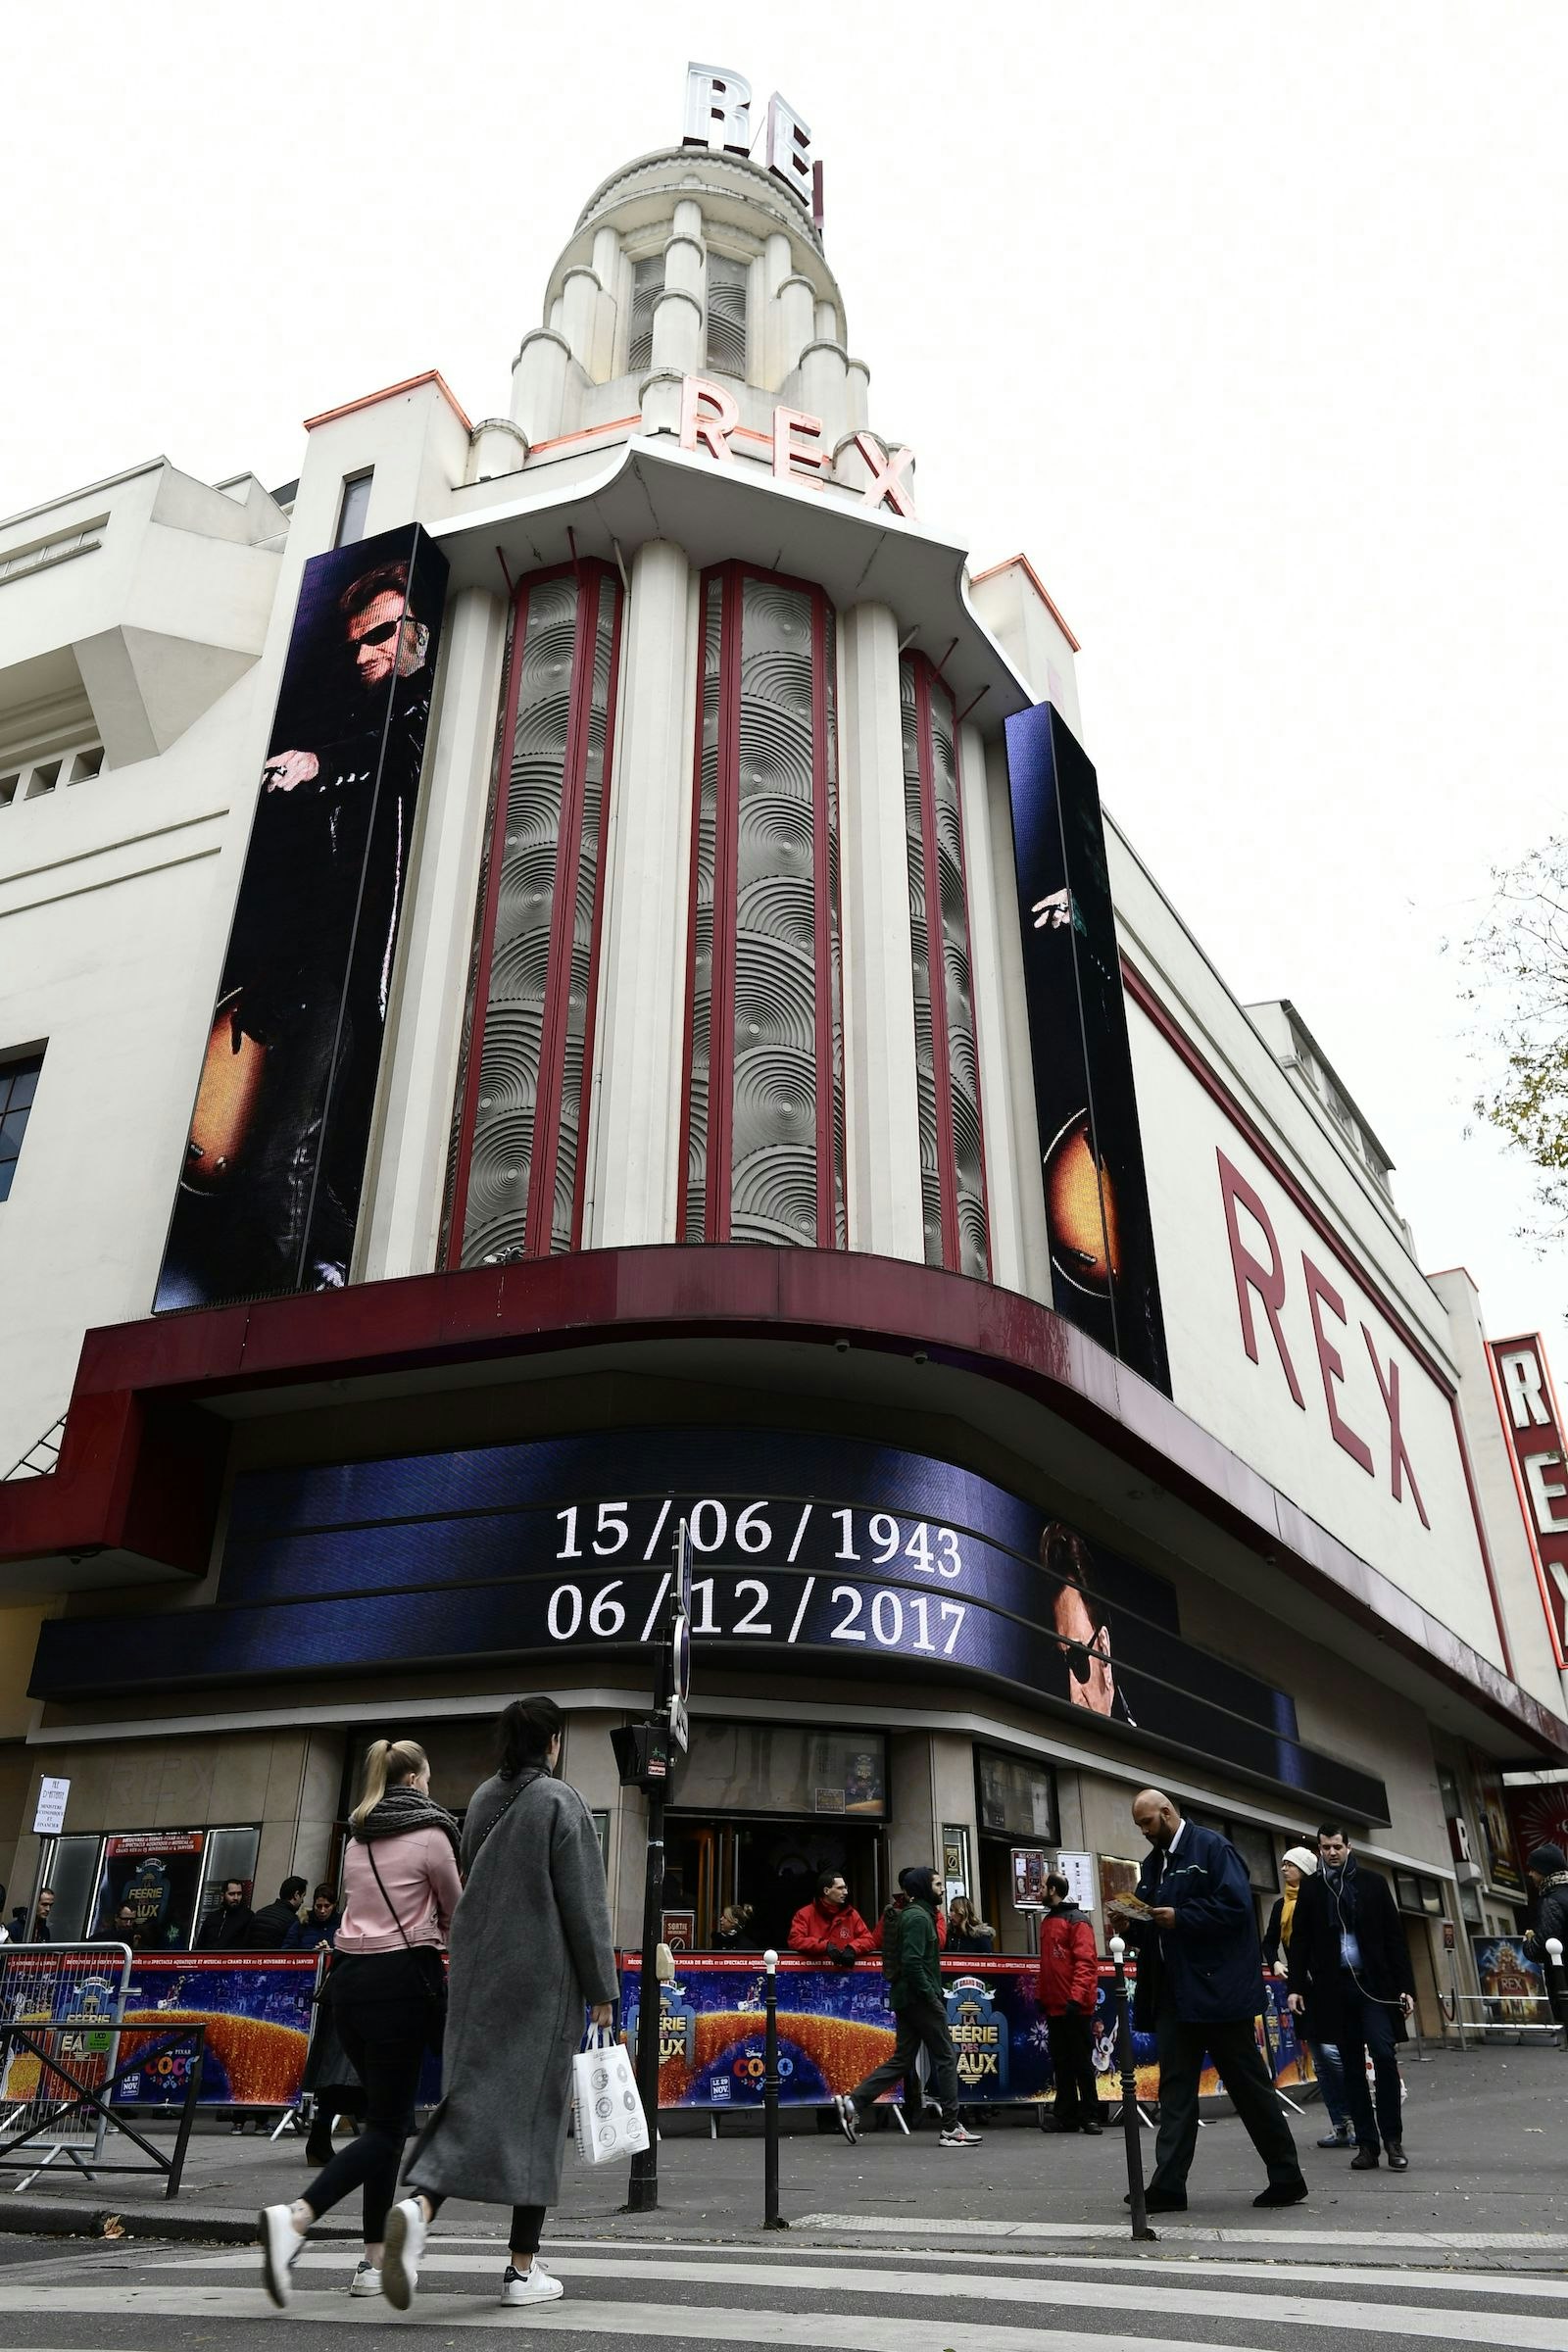 People walk past the Grand Rex cinema, bearing on its facade "15/06/1943" and "06/12/2017", the date of birth and death of late French singer and actor Johnny Hallyday, on December 6, 2017, in Paris. 